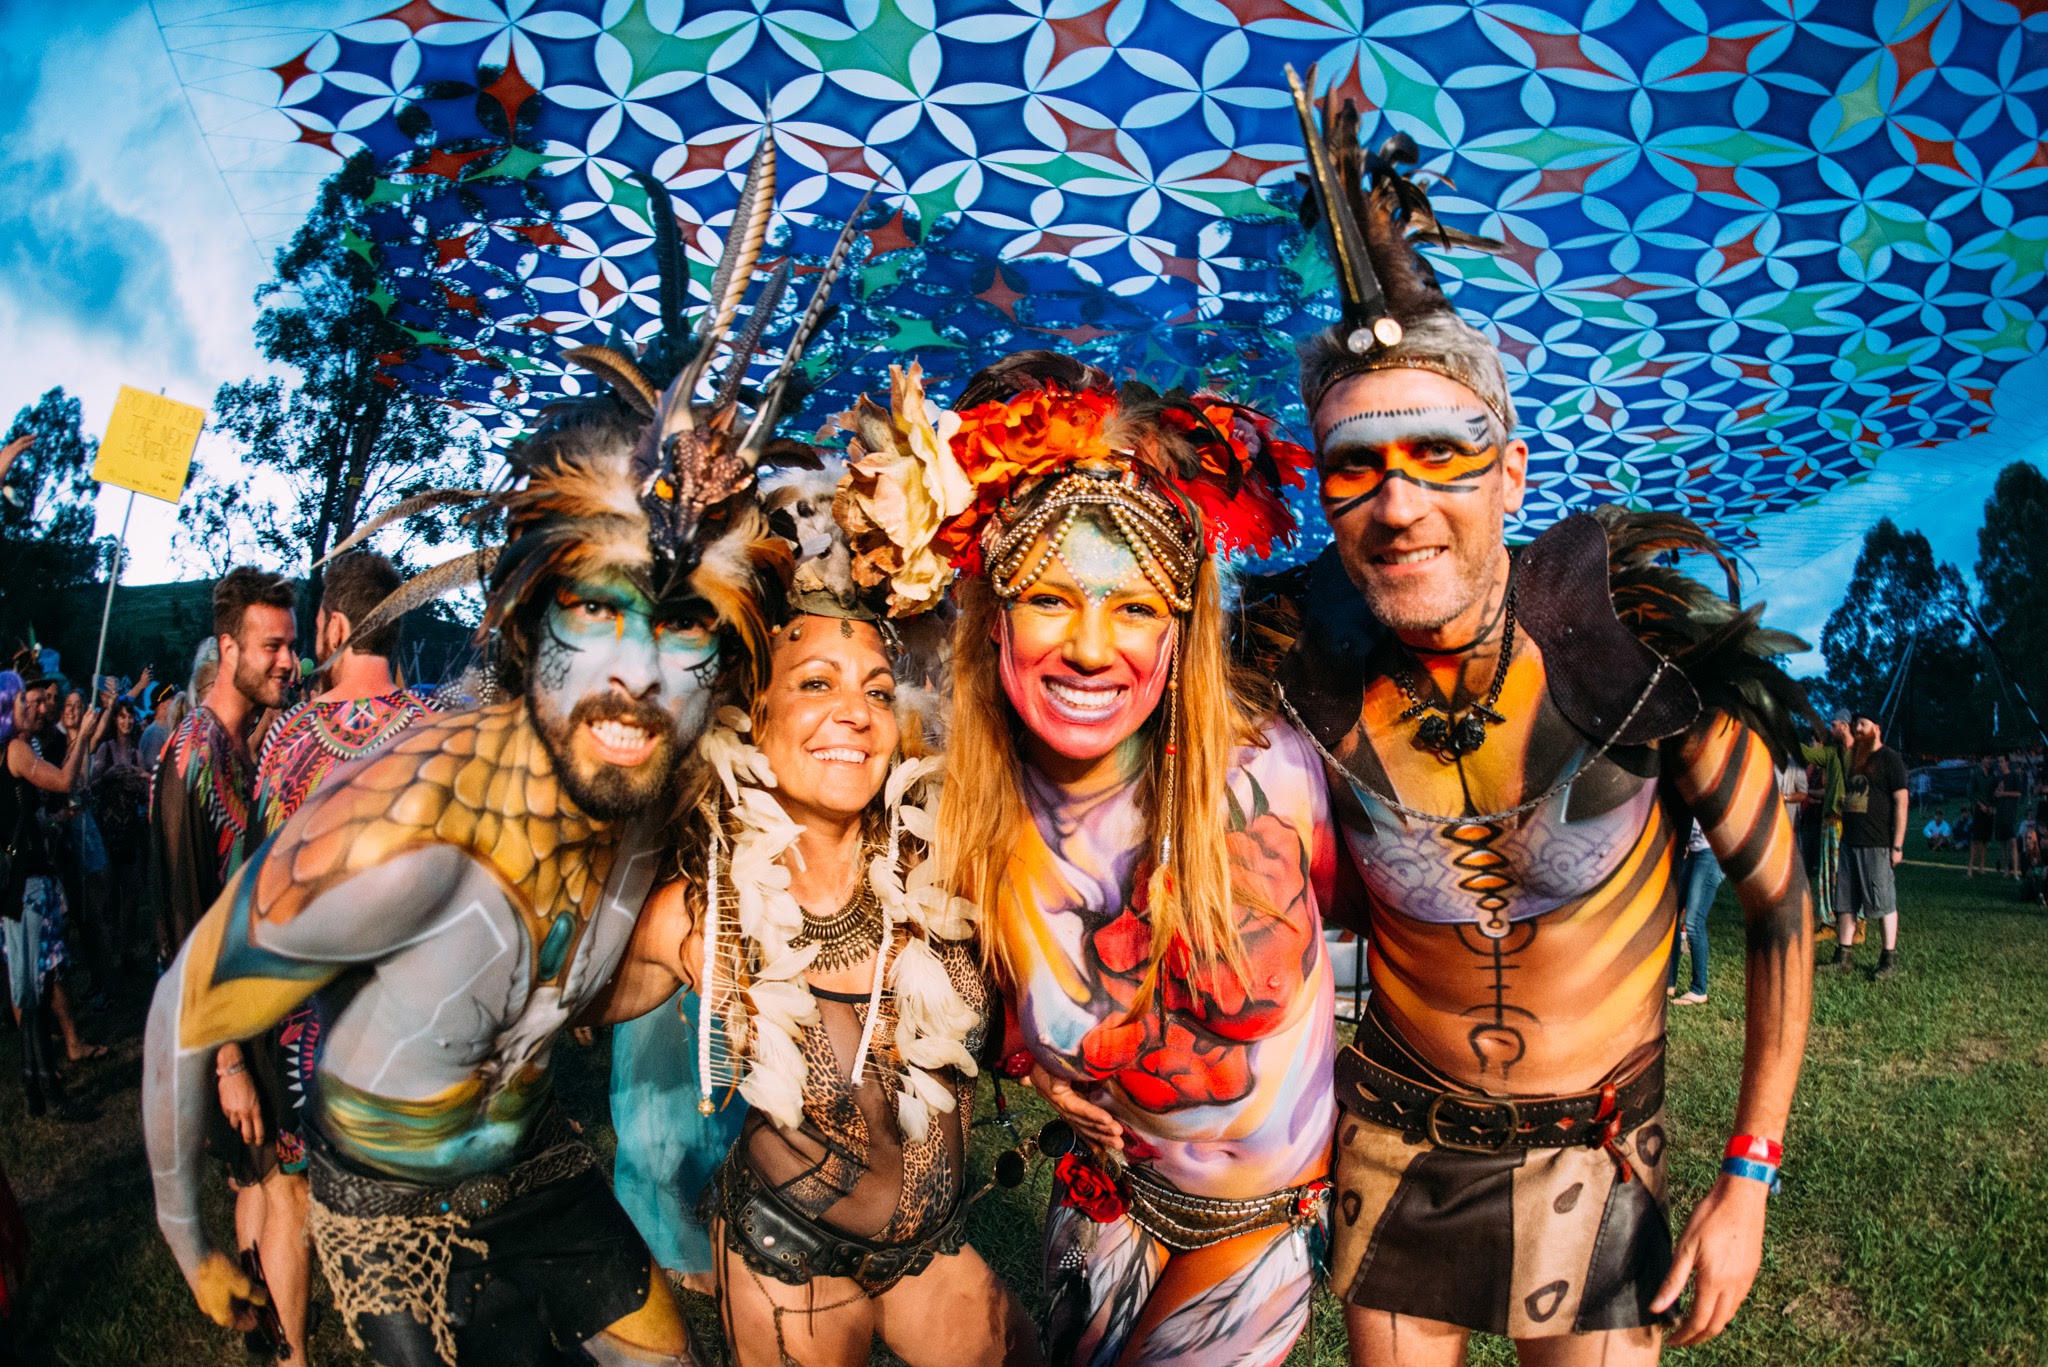 NSW camping festival Subsonic returns in 2016